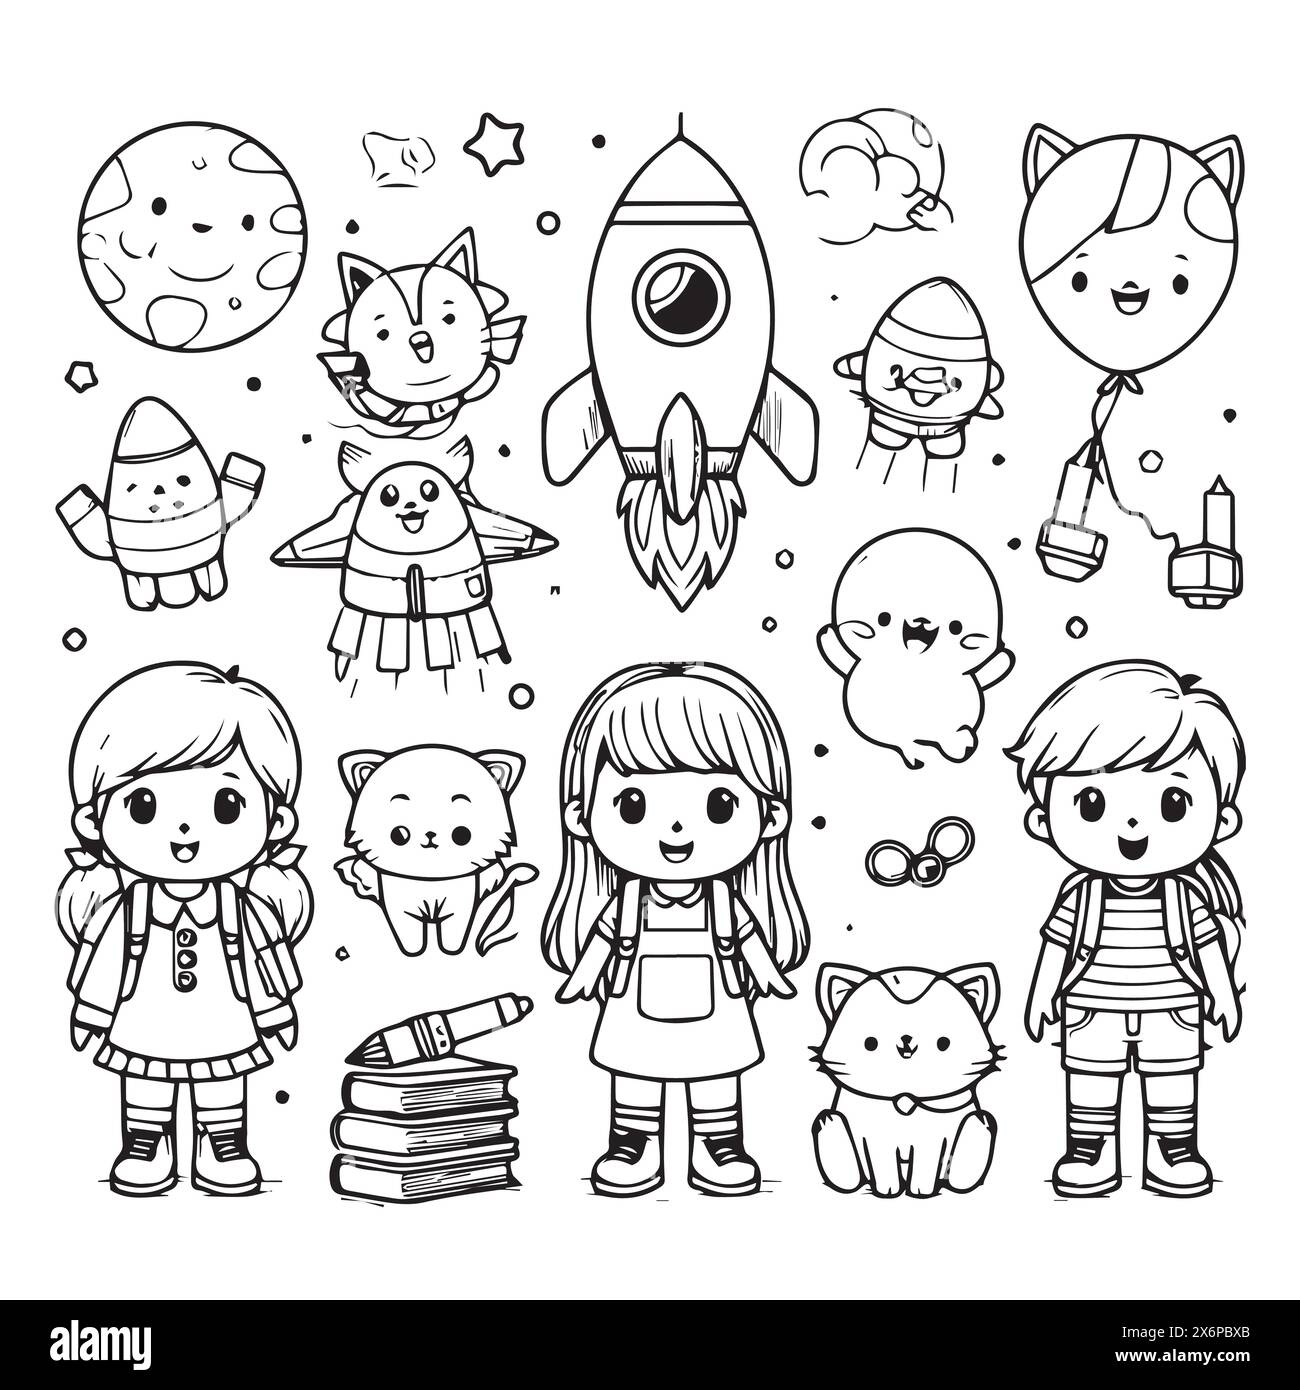 Whimsical Line Art Coloring Book Vector Designs for Children: Creative and Engaging Illustrations to Spark Imagination Stock Vector